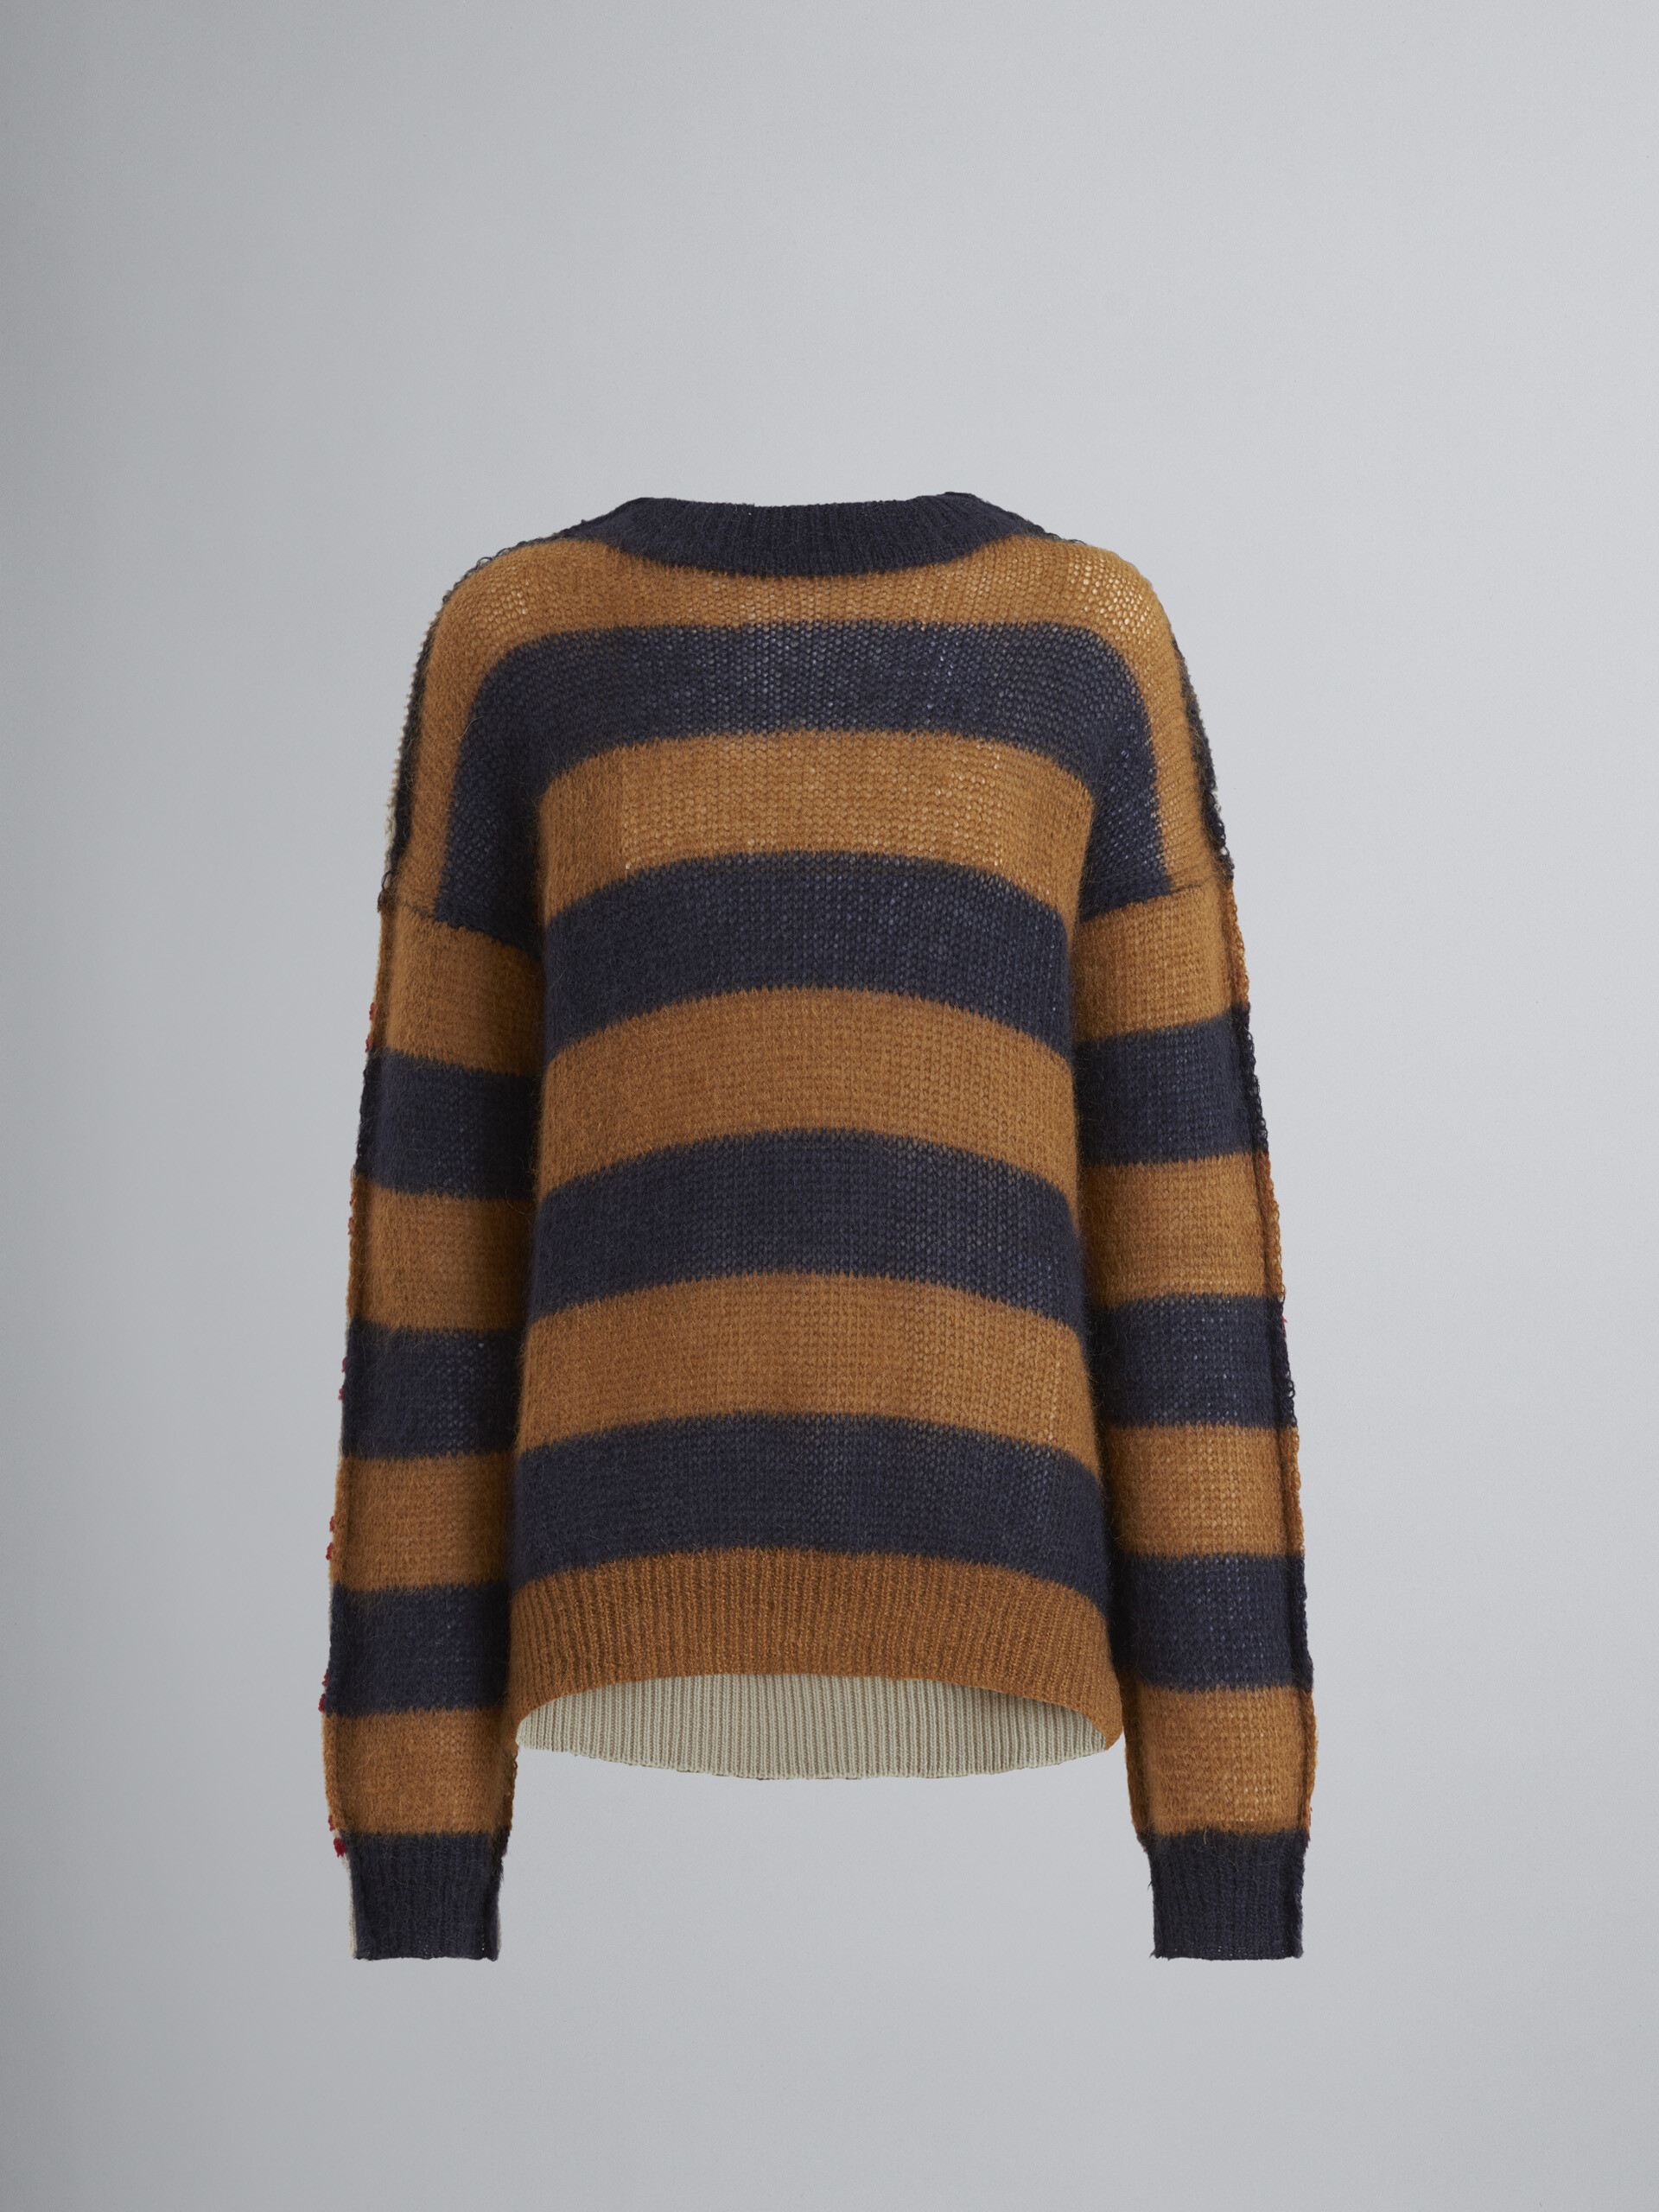 Wool and mohair sweater with raw-edged seams - Pullovers - Image 1